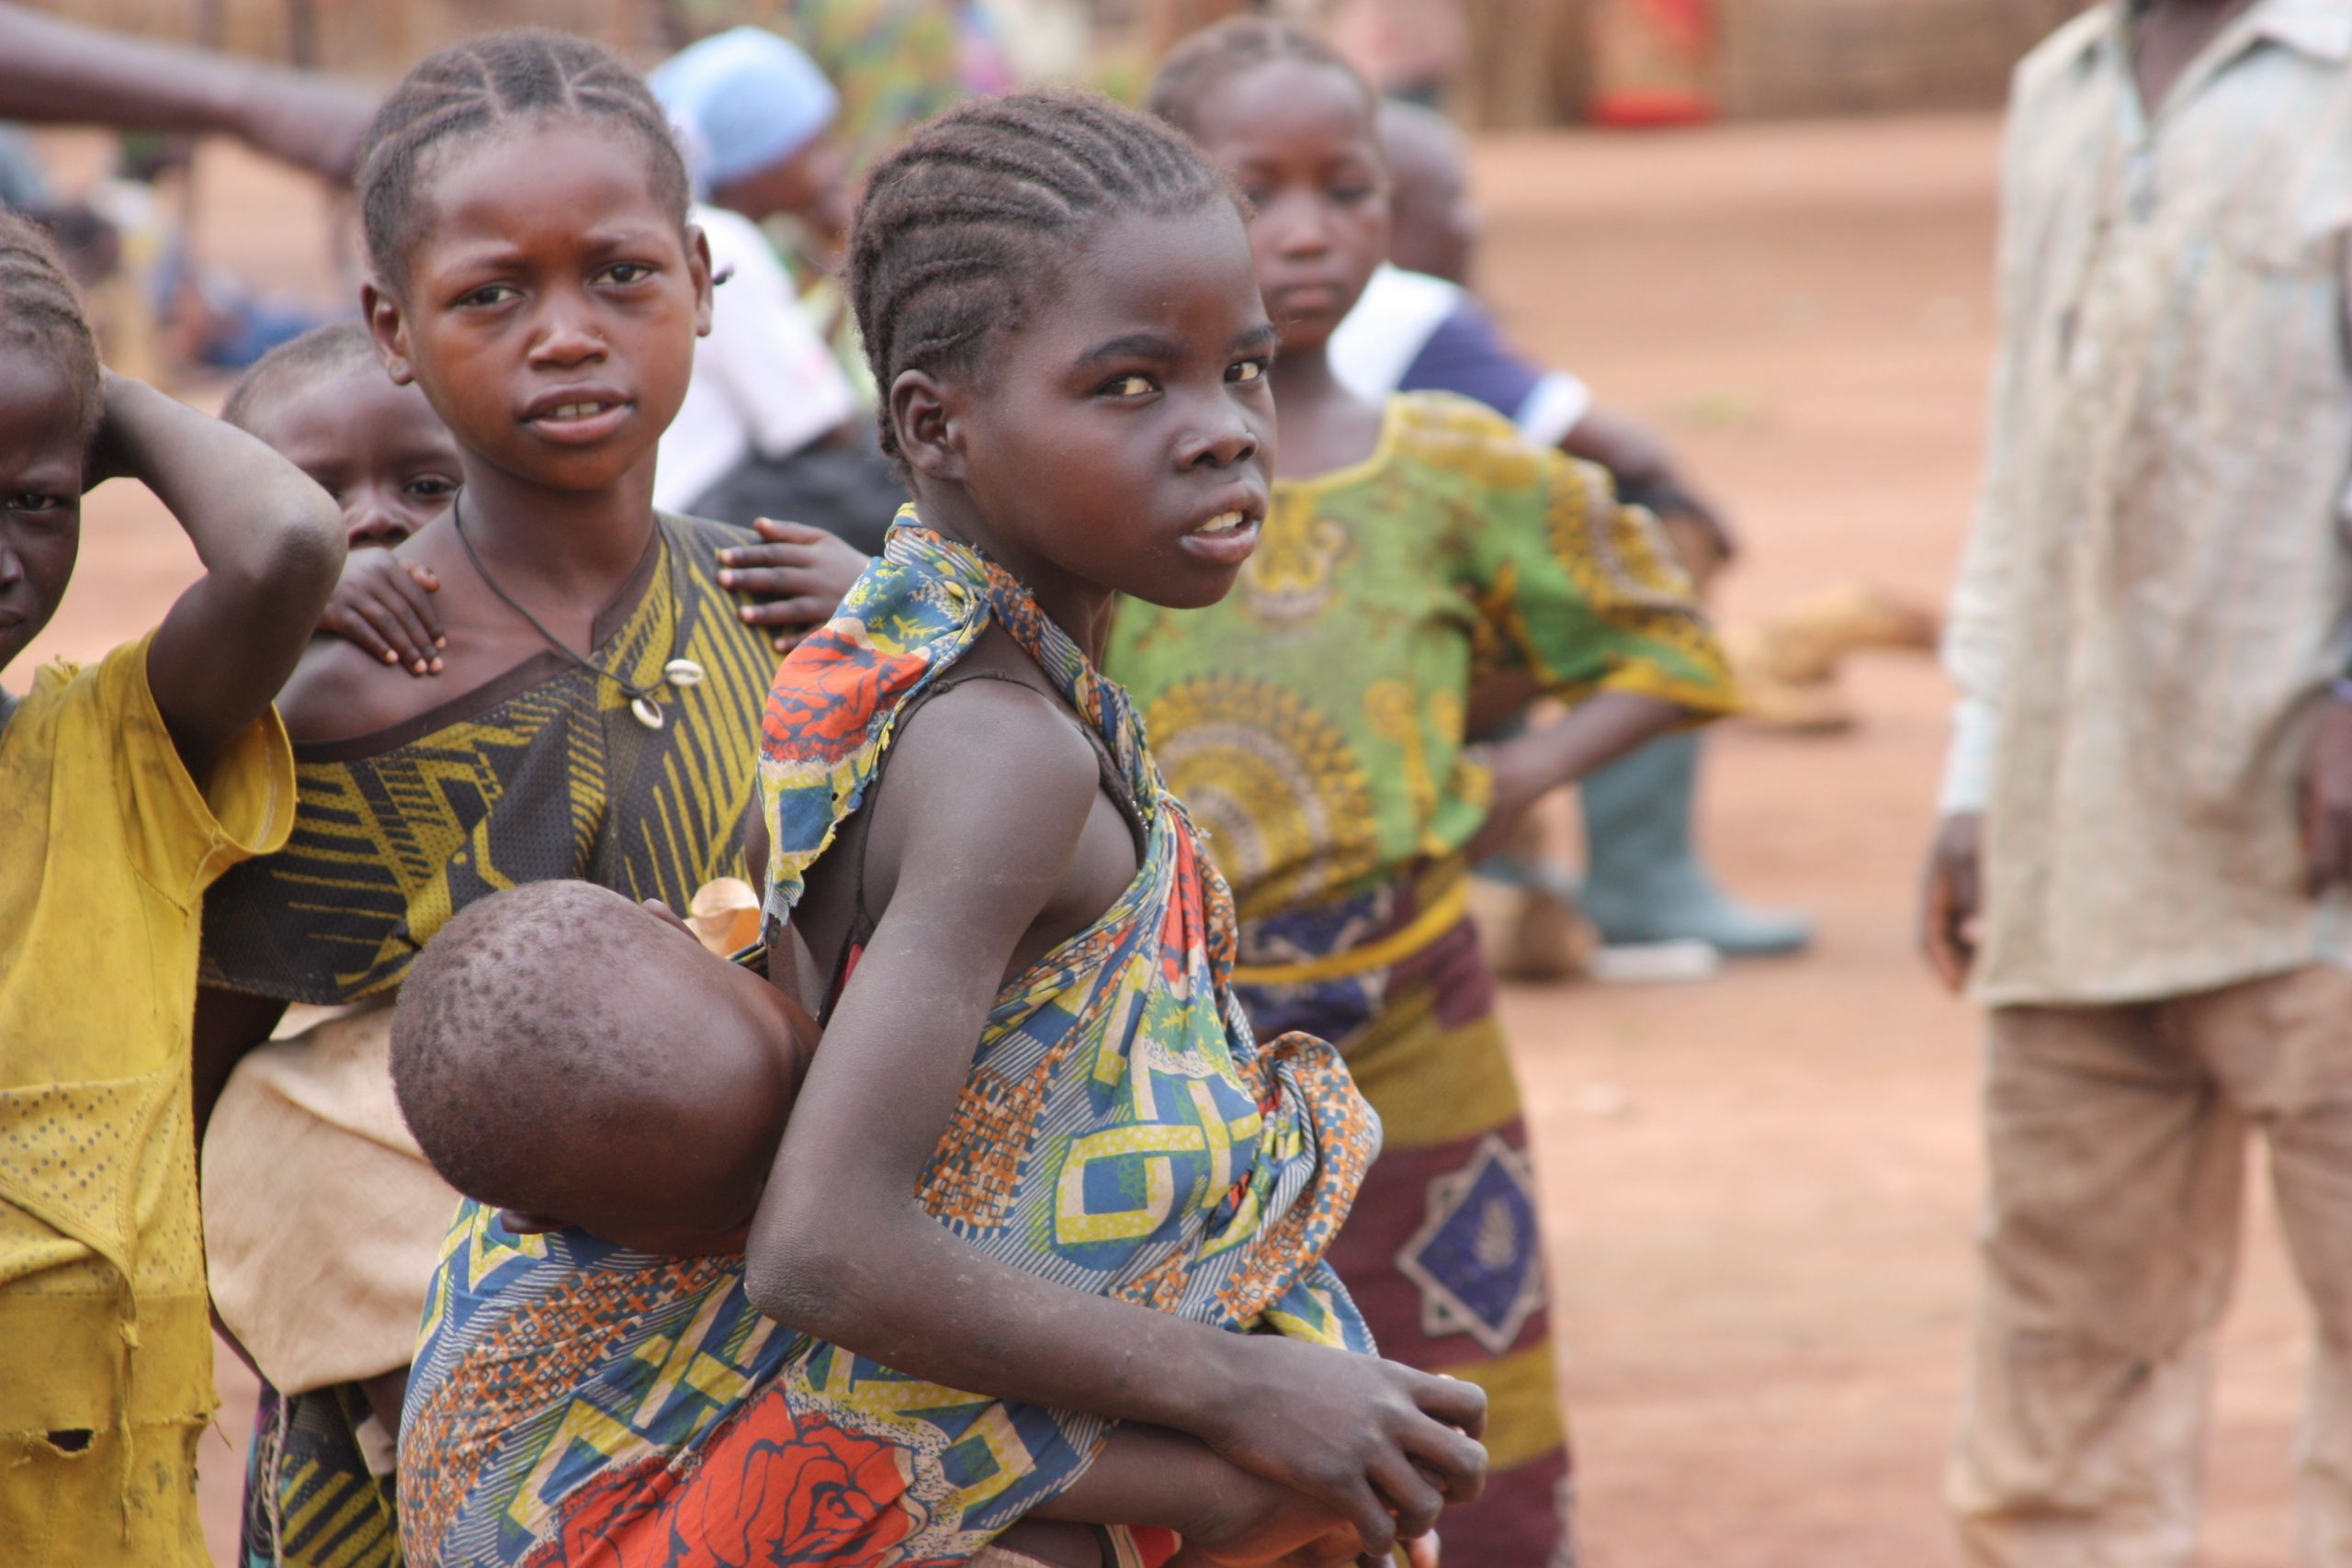 20,000 NIGERIAN GIRLS SAVED FROM CHILD MARRIAGE IN THREE YEARS